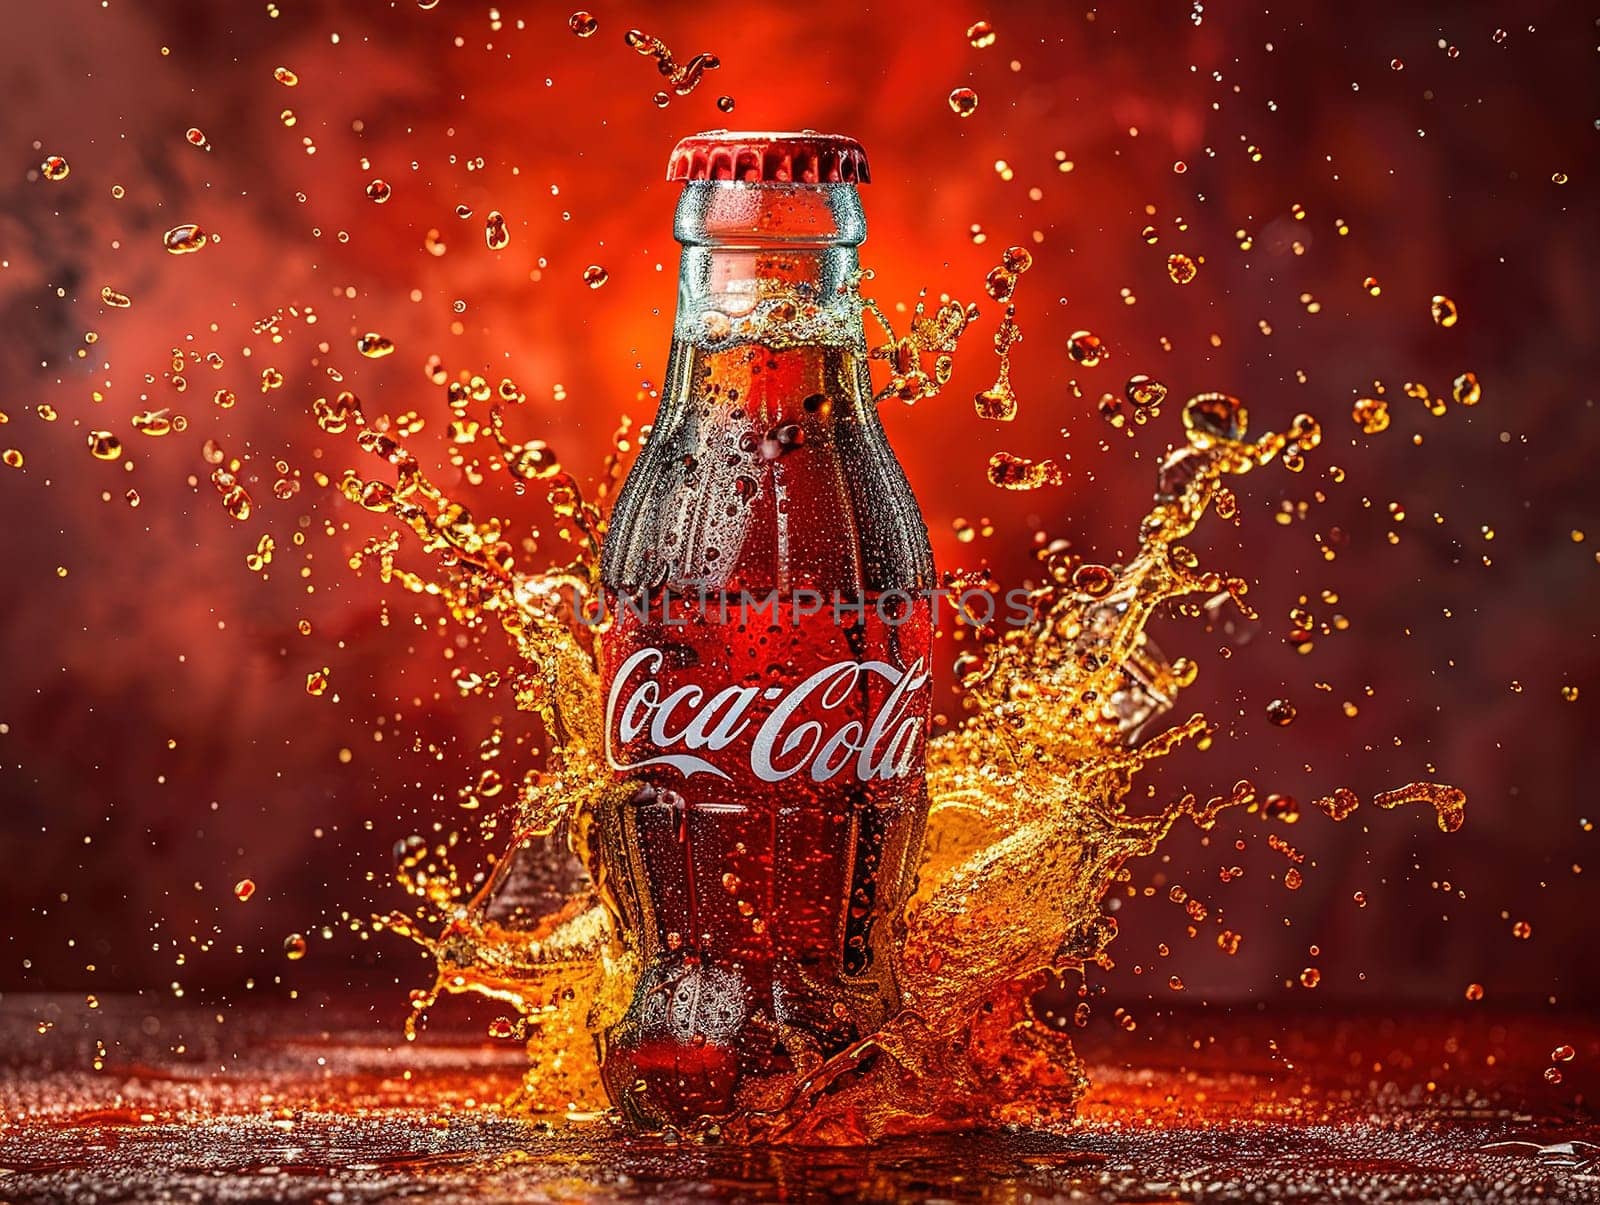 Delicious Cola photography, explosion flavors, studio lighting, studio background well-lit, vibrant colors, sharp-focus, high-quality, artistic, unique Cola with Ice. Food background